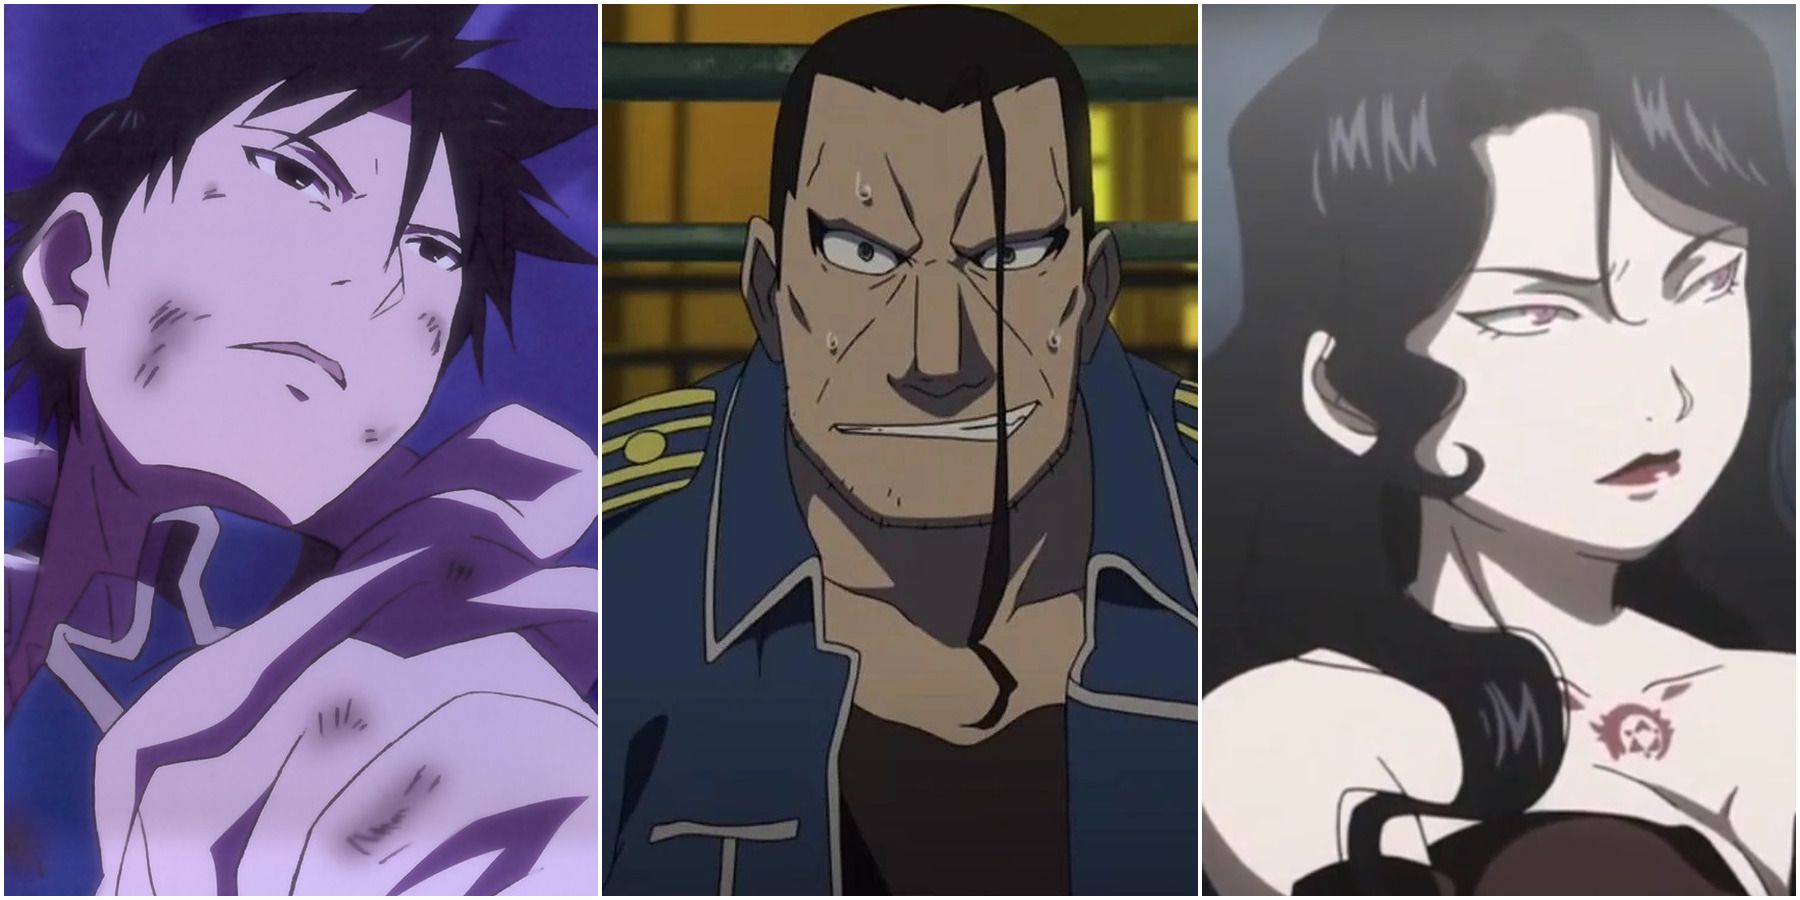 27+ Characters In Fullmetal Alchemist - All You Need To Know